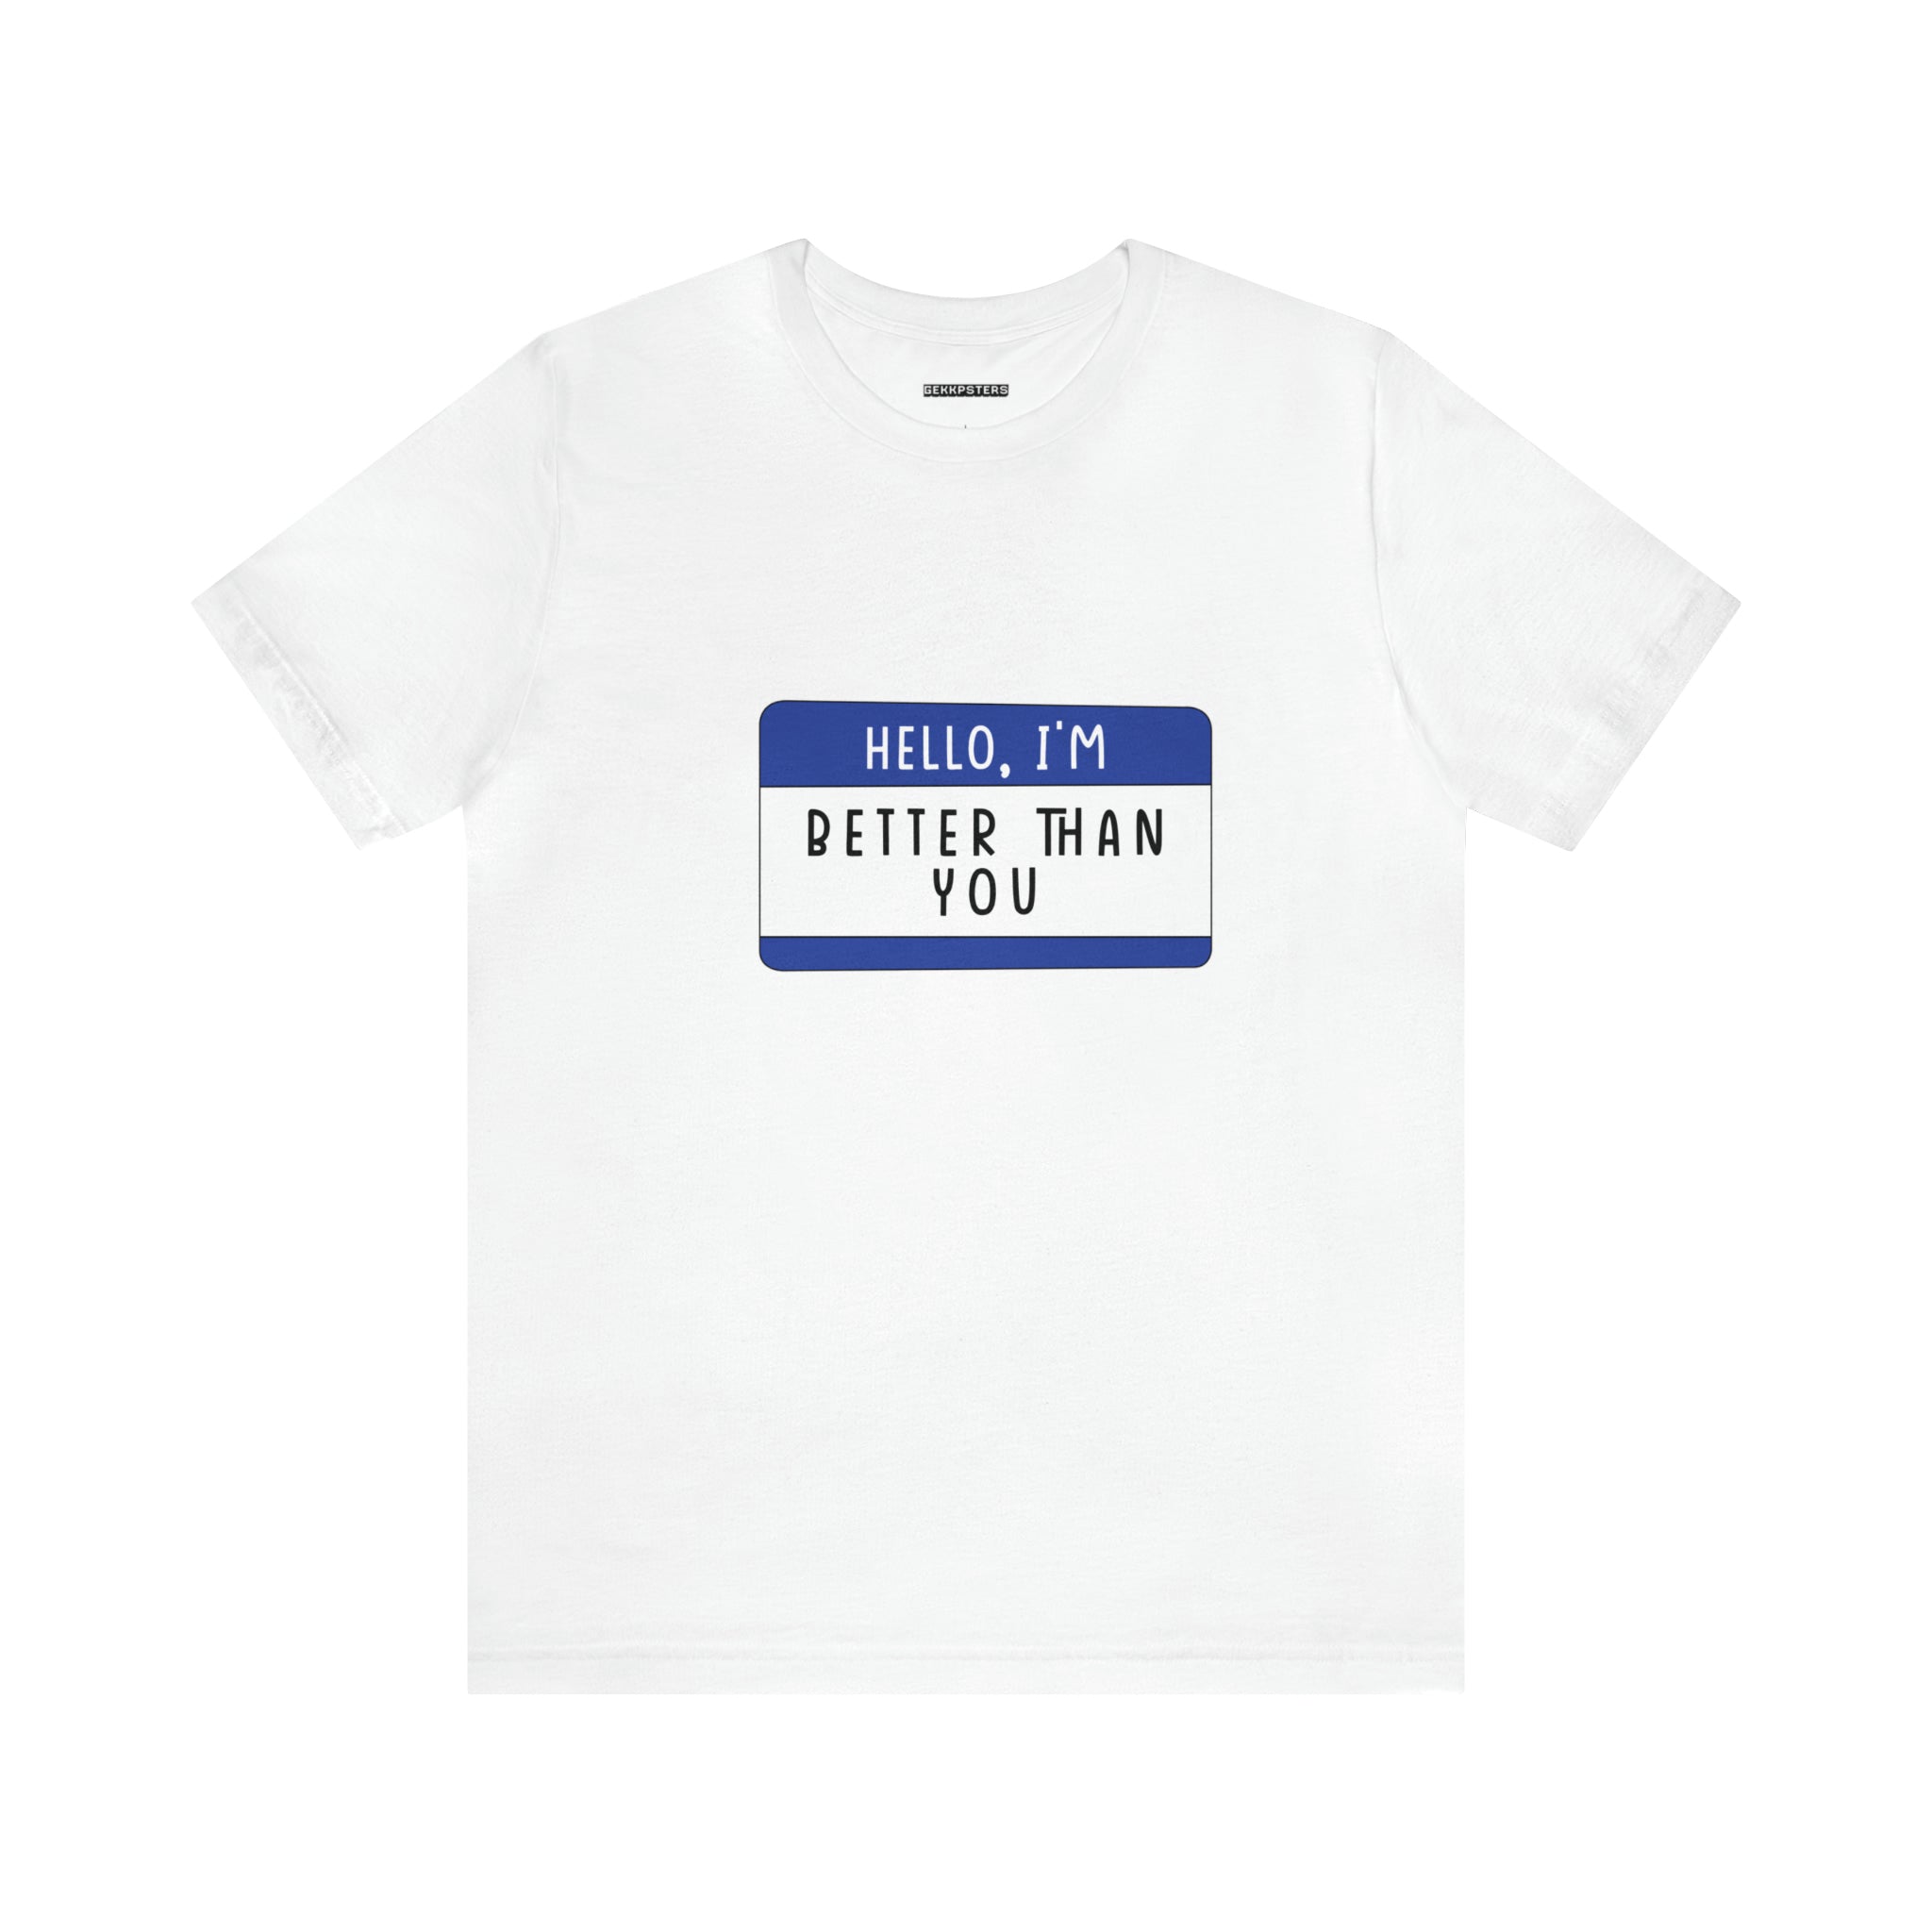 White t-shirt featuring a blue name tag graphic with the text "hello, i'm better than you" on the chest, adding a touch of geeky charm.